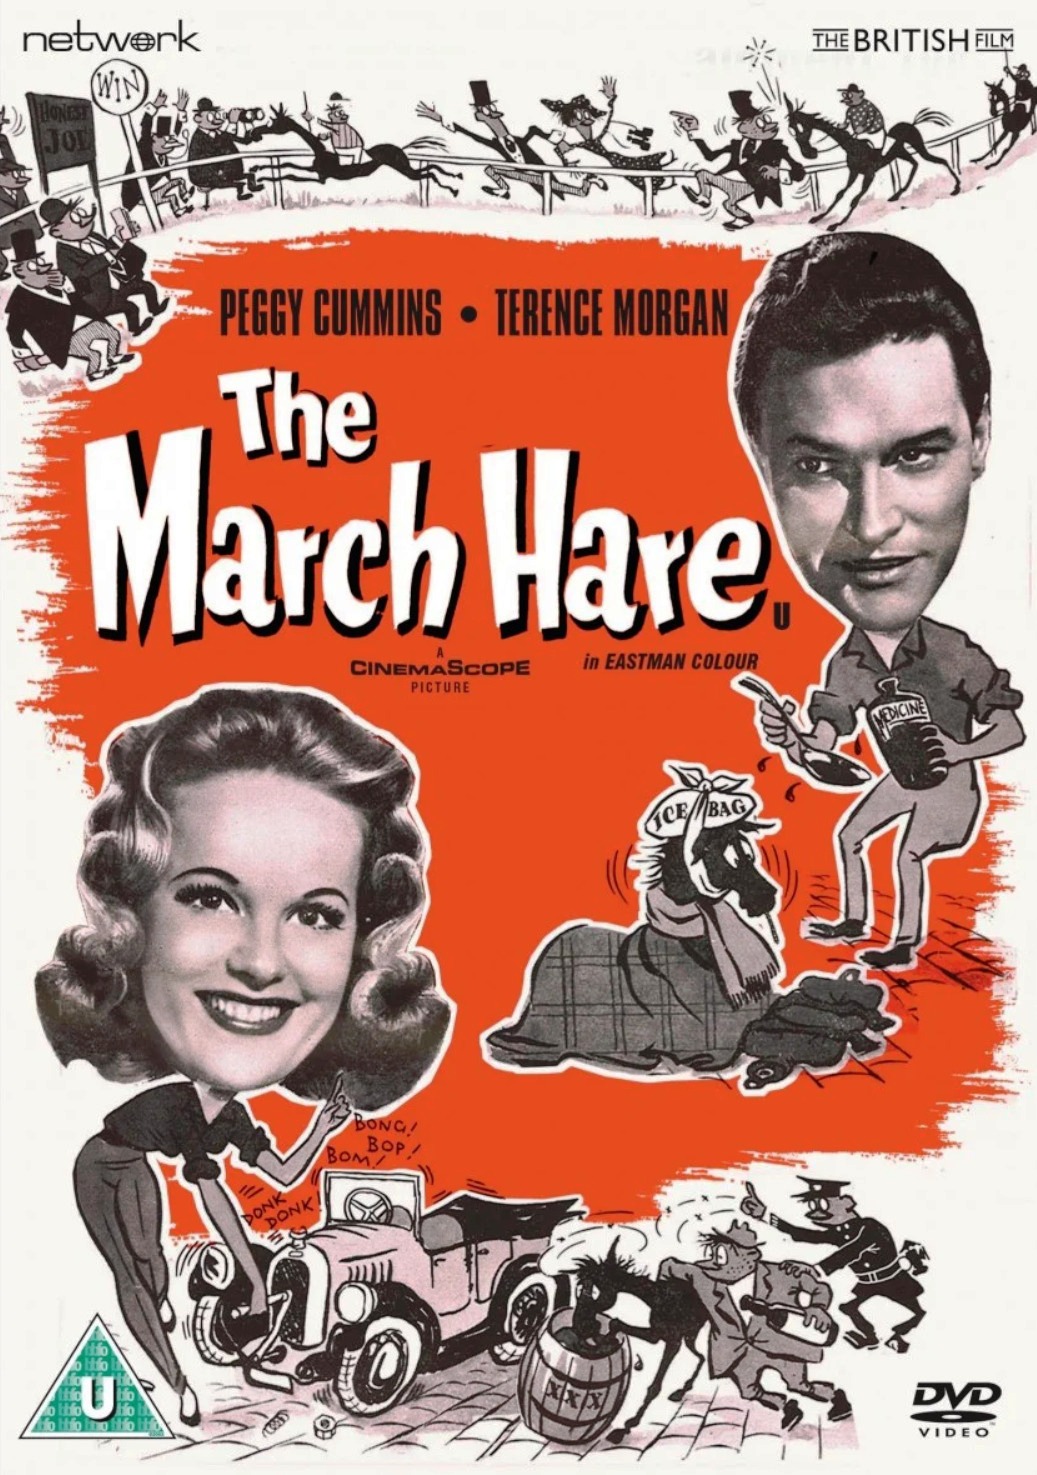 The March Hare (1956) Screenshot 4